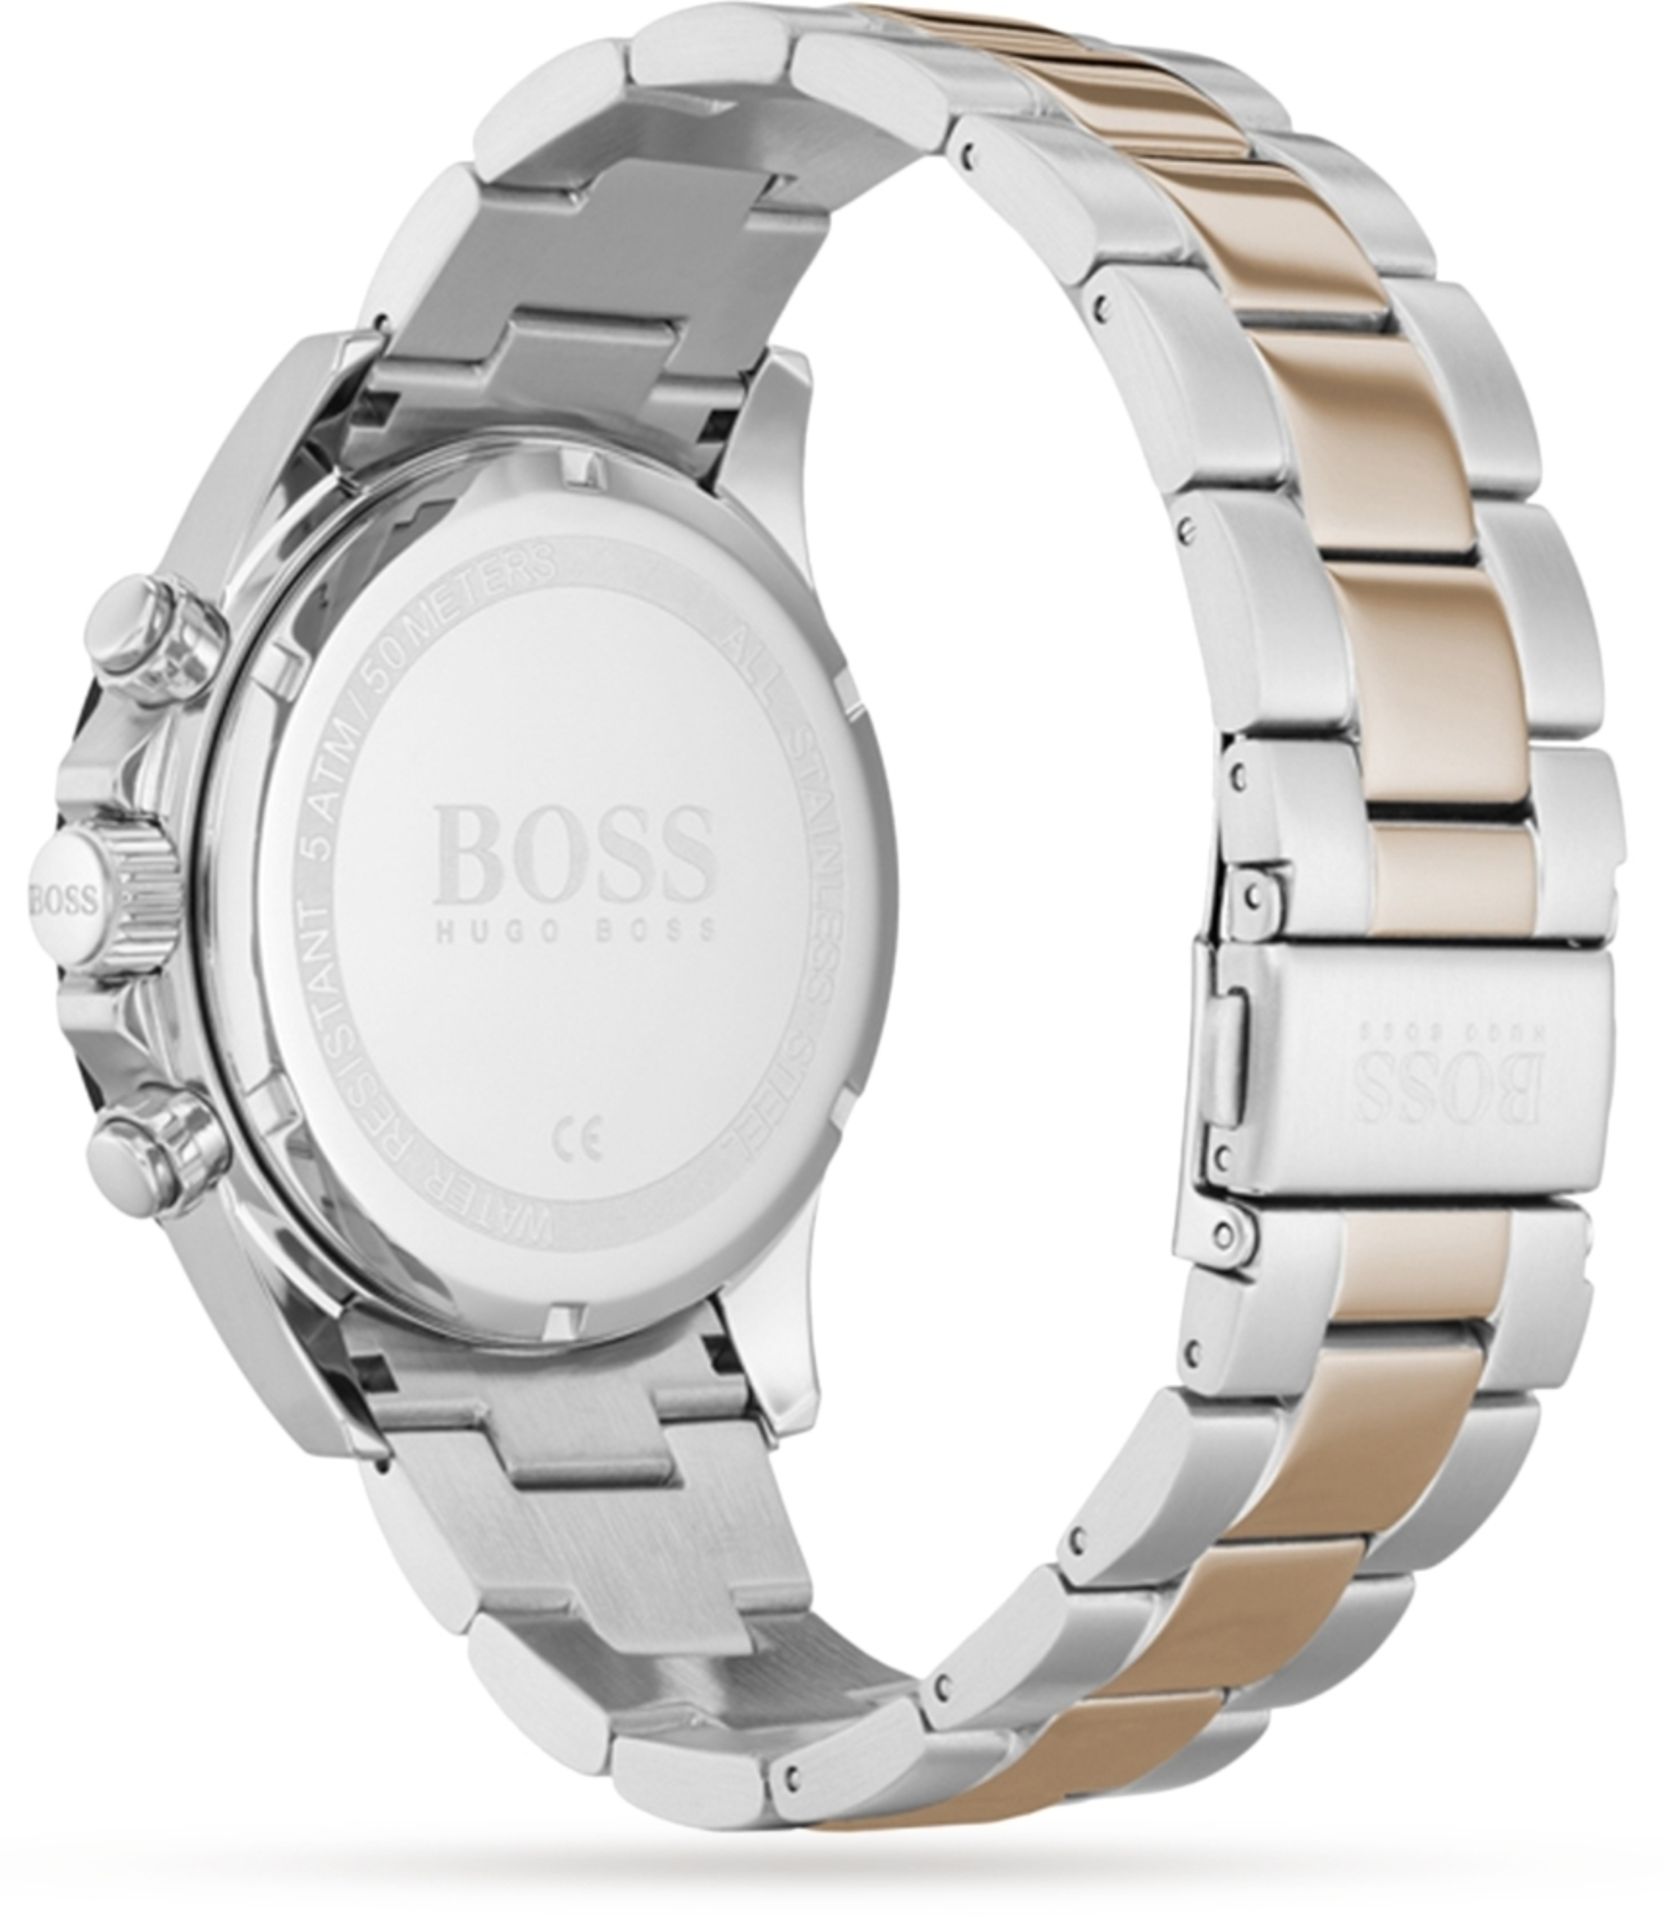 Hugo Boss 1513757 Men's Hero Sport Lux Two Tone Chronograph Watch  Model: HB 1513757.Case: Stainless - Image 4 of 6